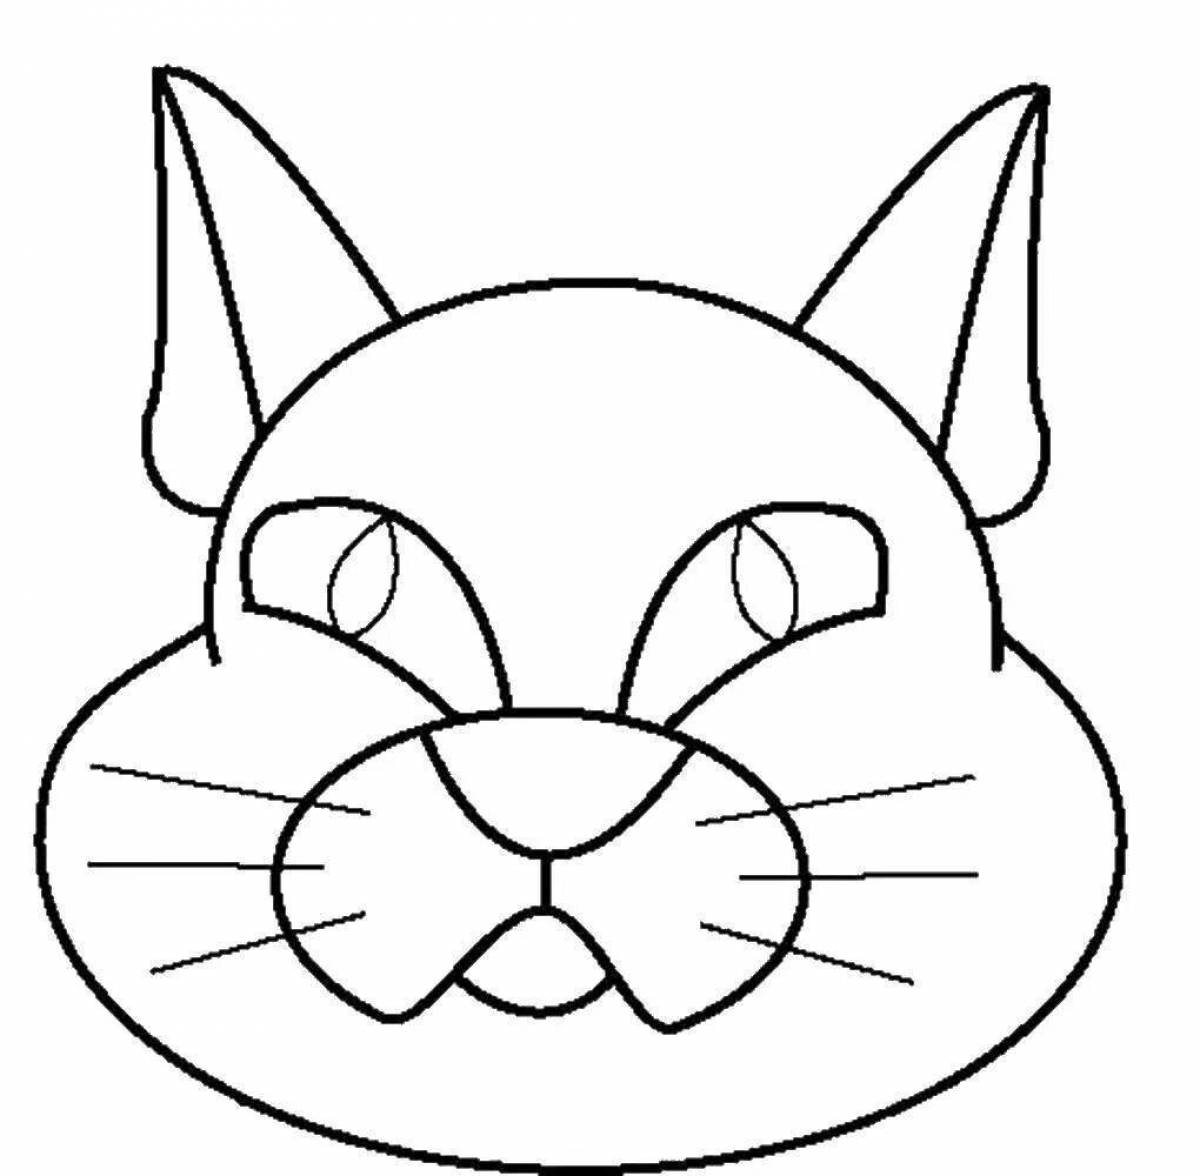 Coloring page fluffy cat muzzle